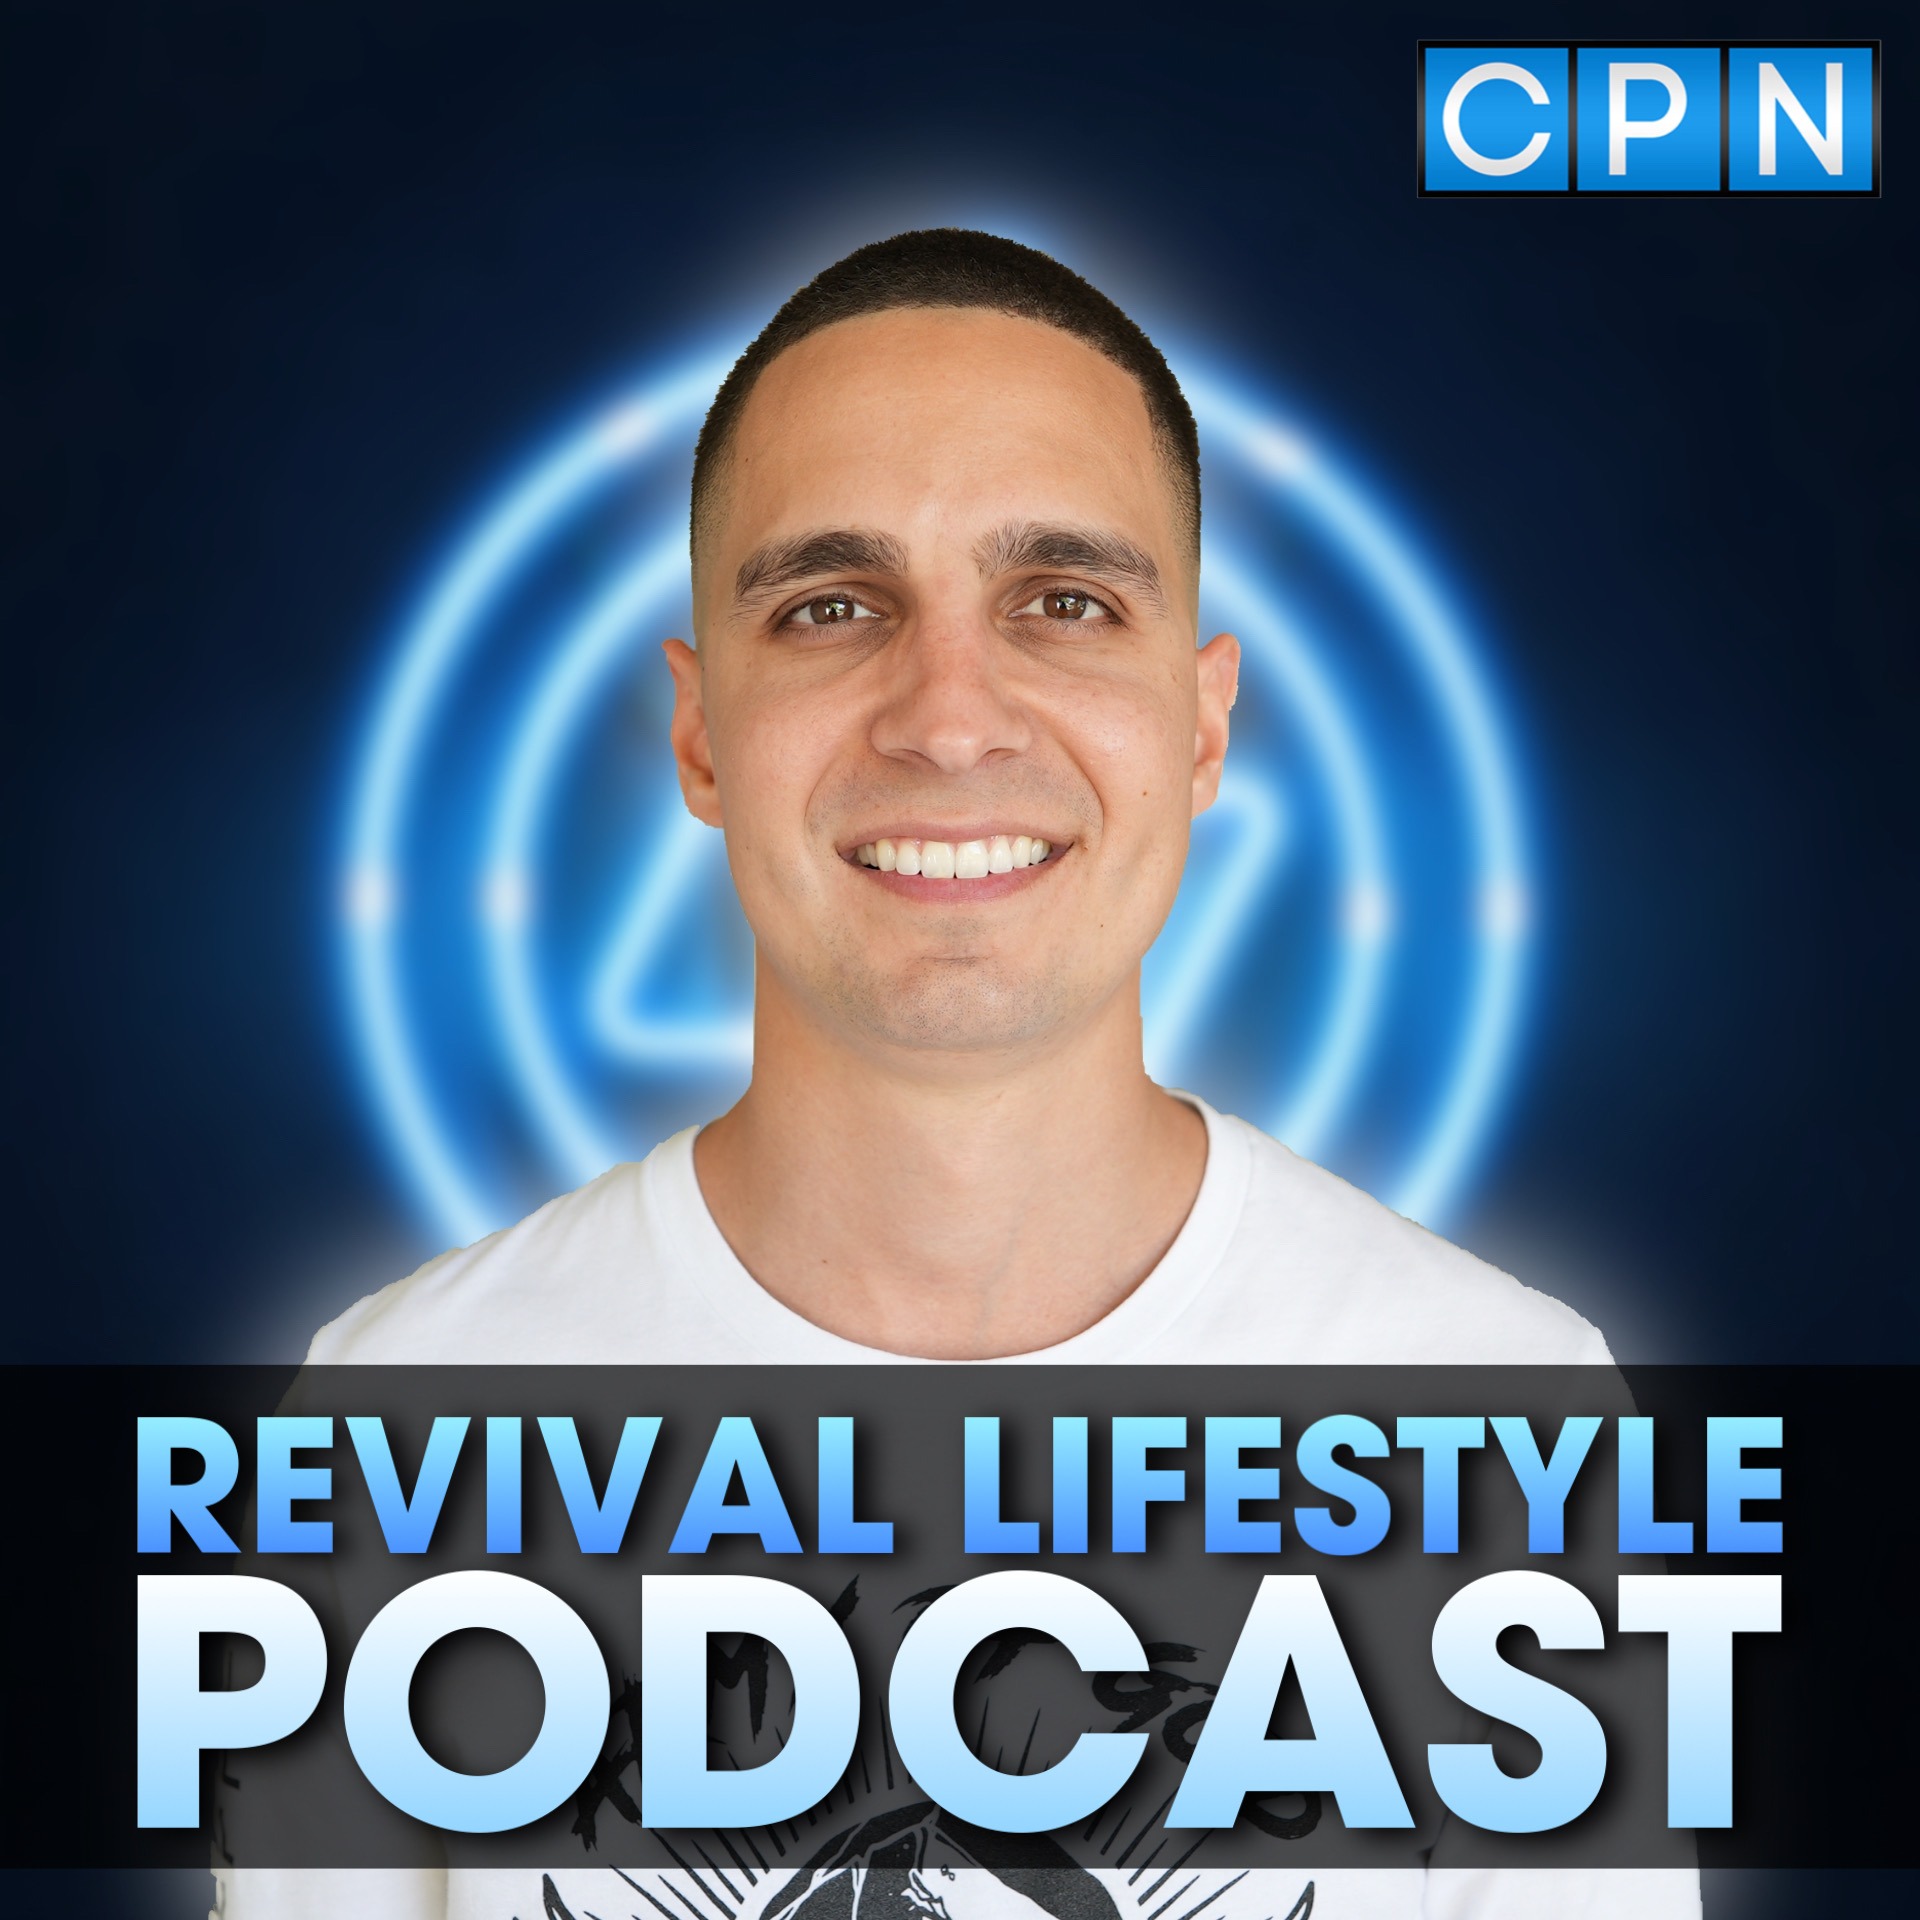 He was in a Revival that lasted 2100+ days W/ Dr. Michael Brown (EP 167)